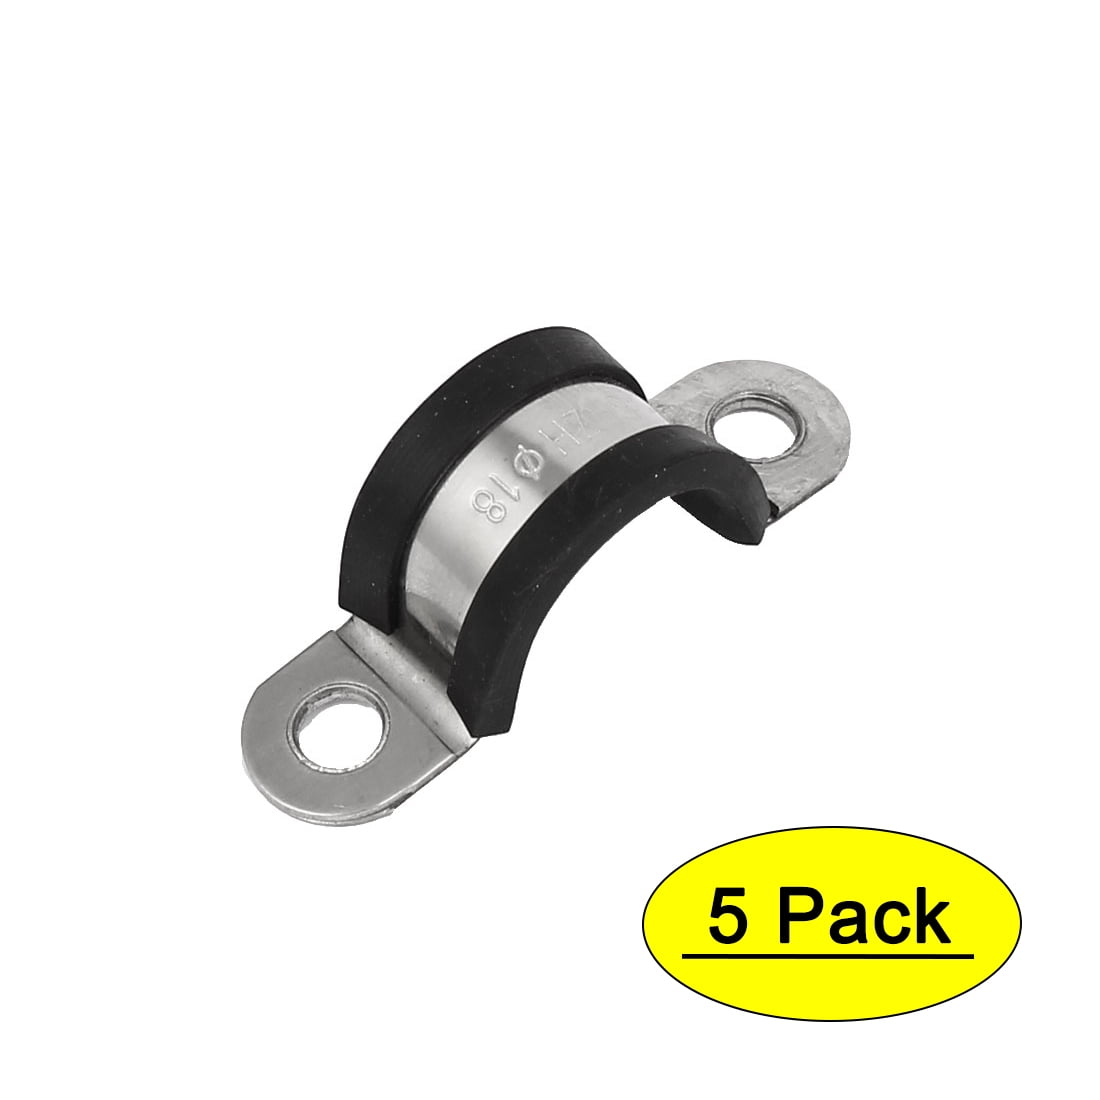 50Pcs Mixed Size Rubber Gasket Insulated Stainless Steel Cable Clamp Bracket Set 